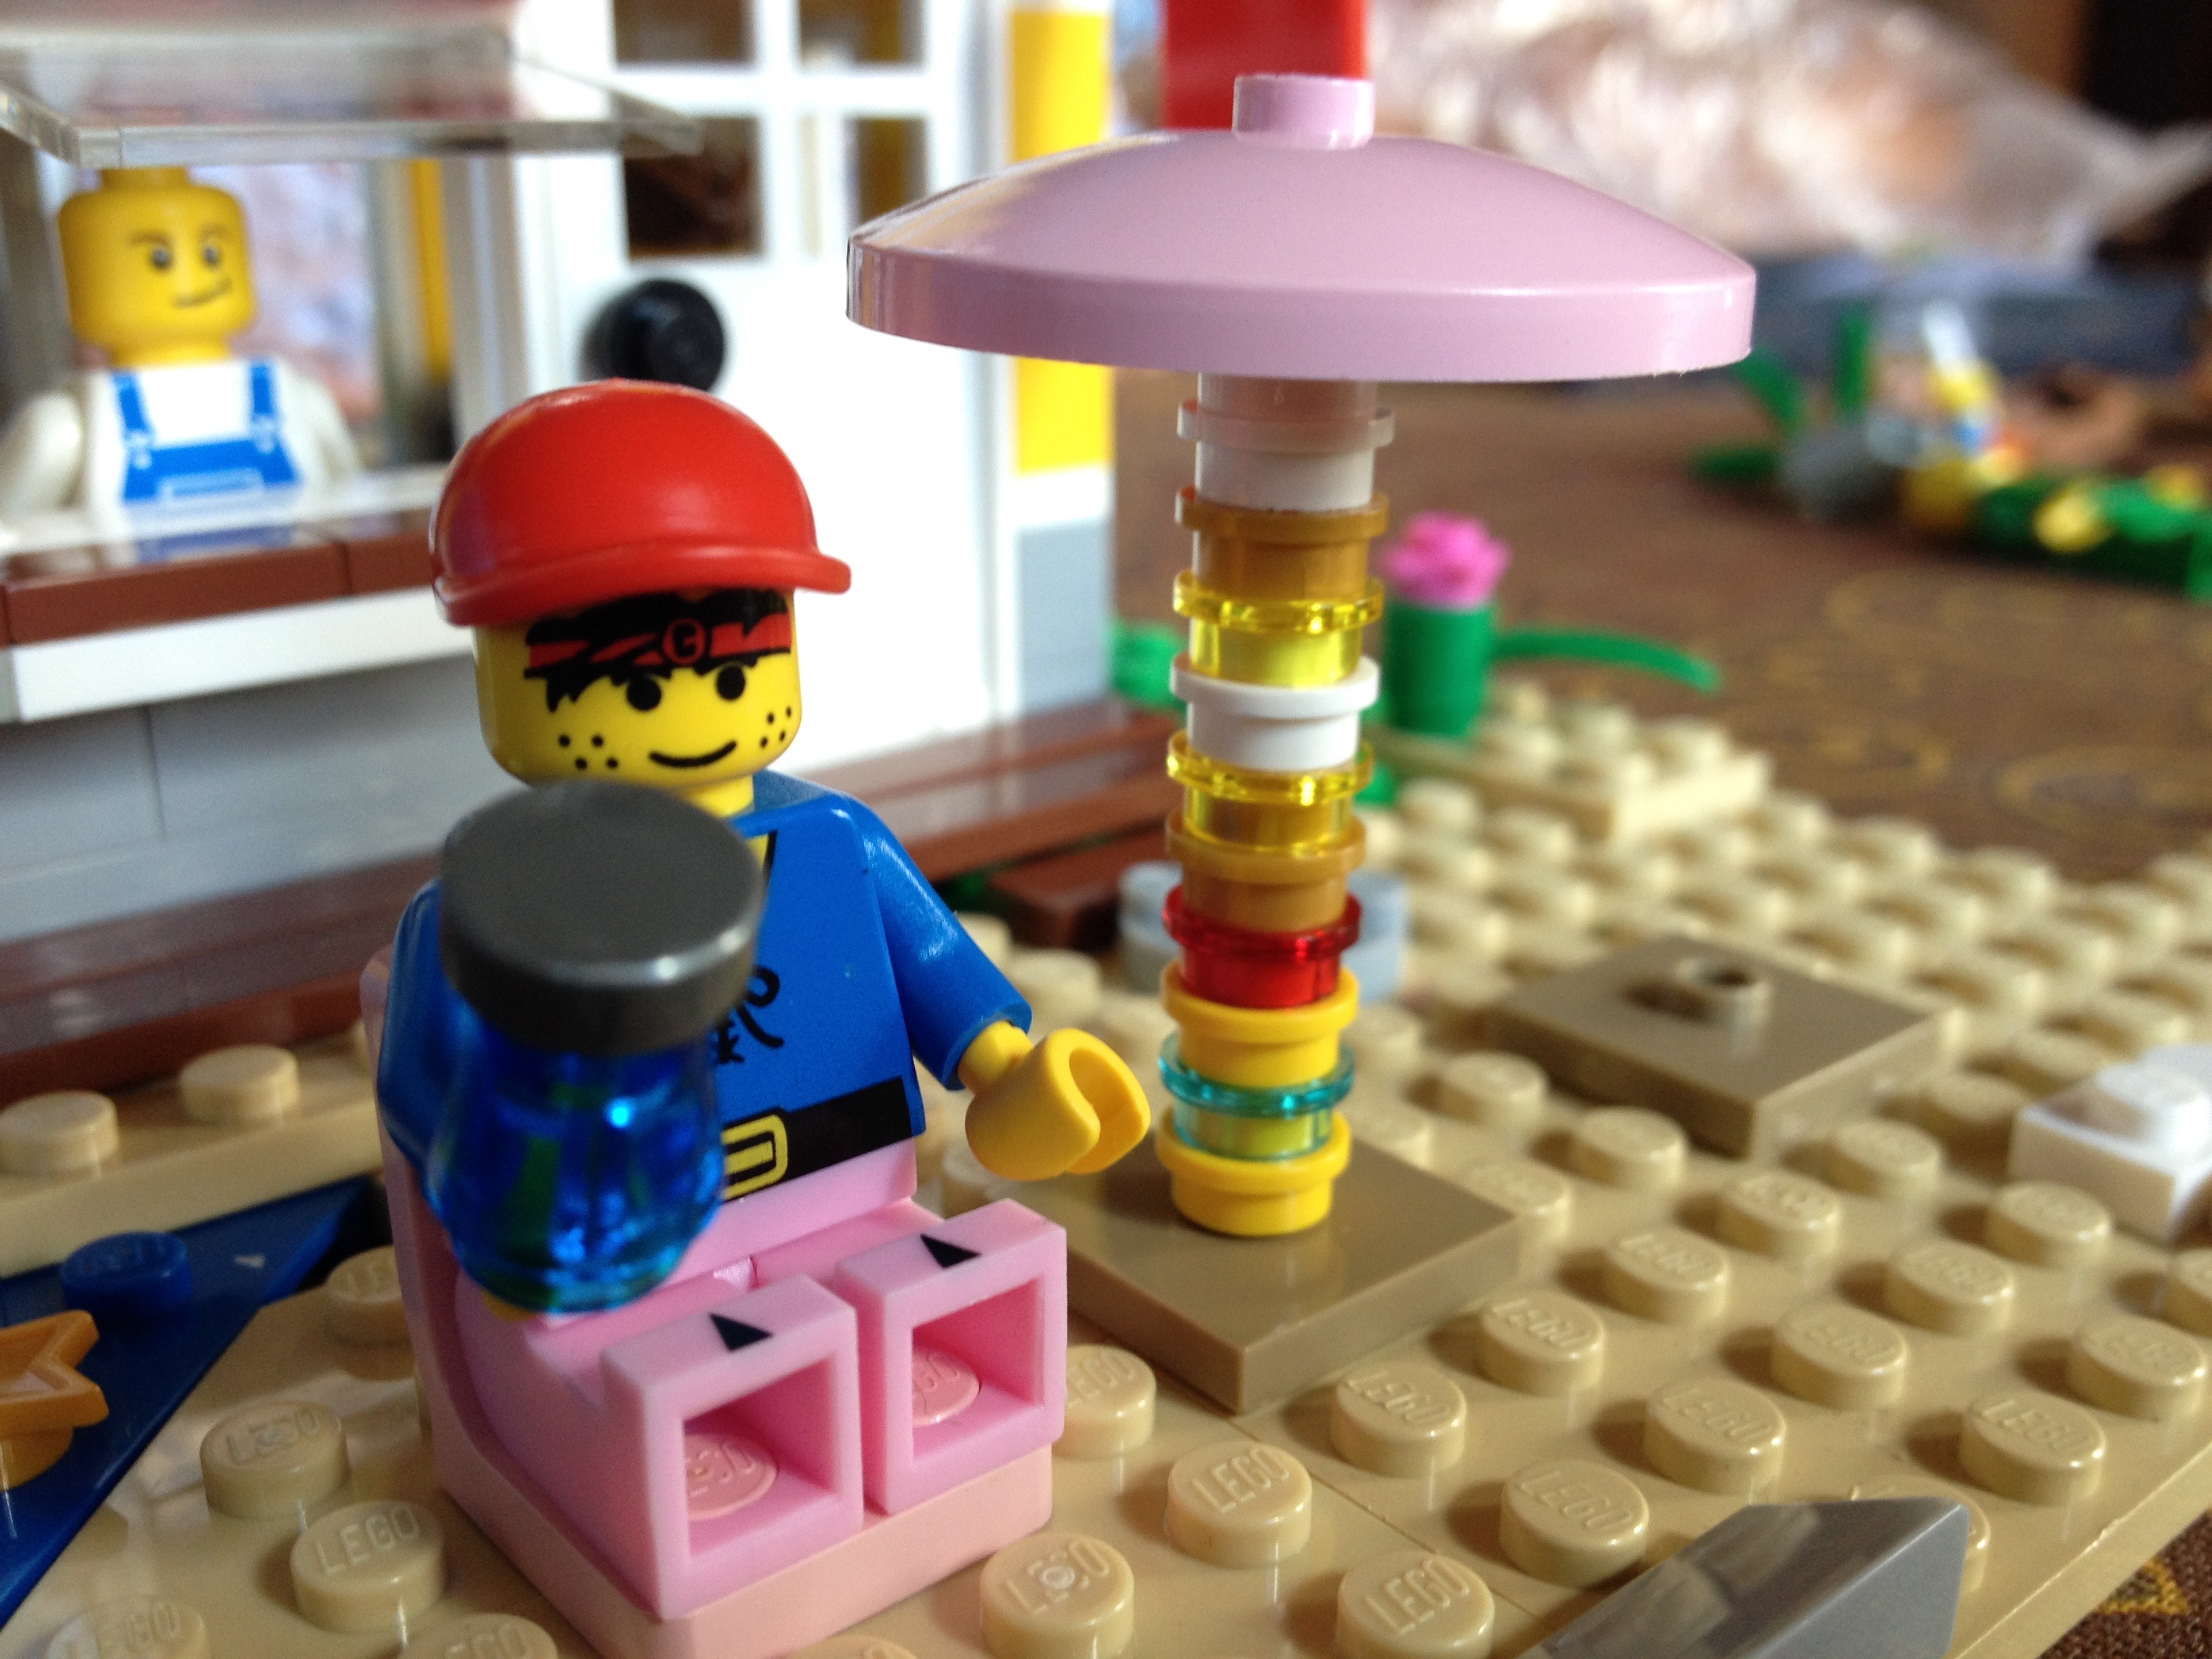 A lego person is drinking from a lego waterbottle. The lego person is sitting in a pink chair on the beach next to a striped umbrella.